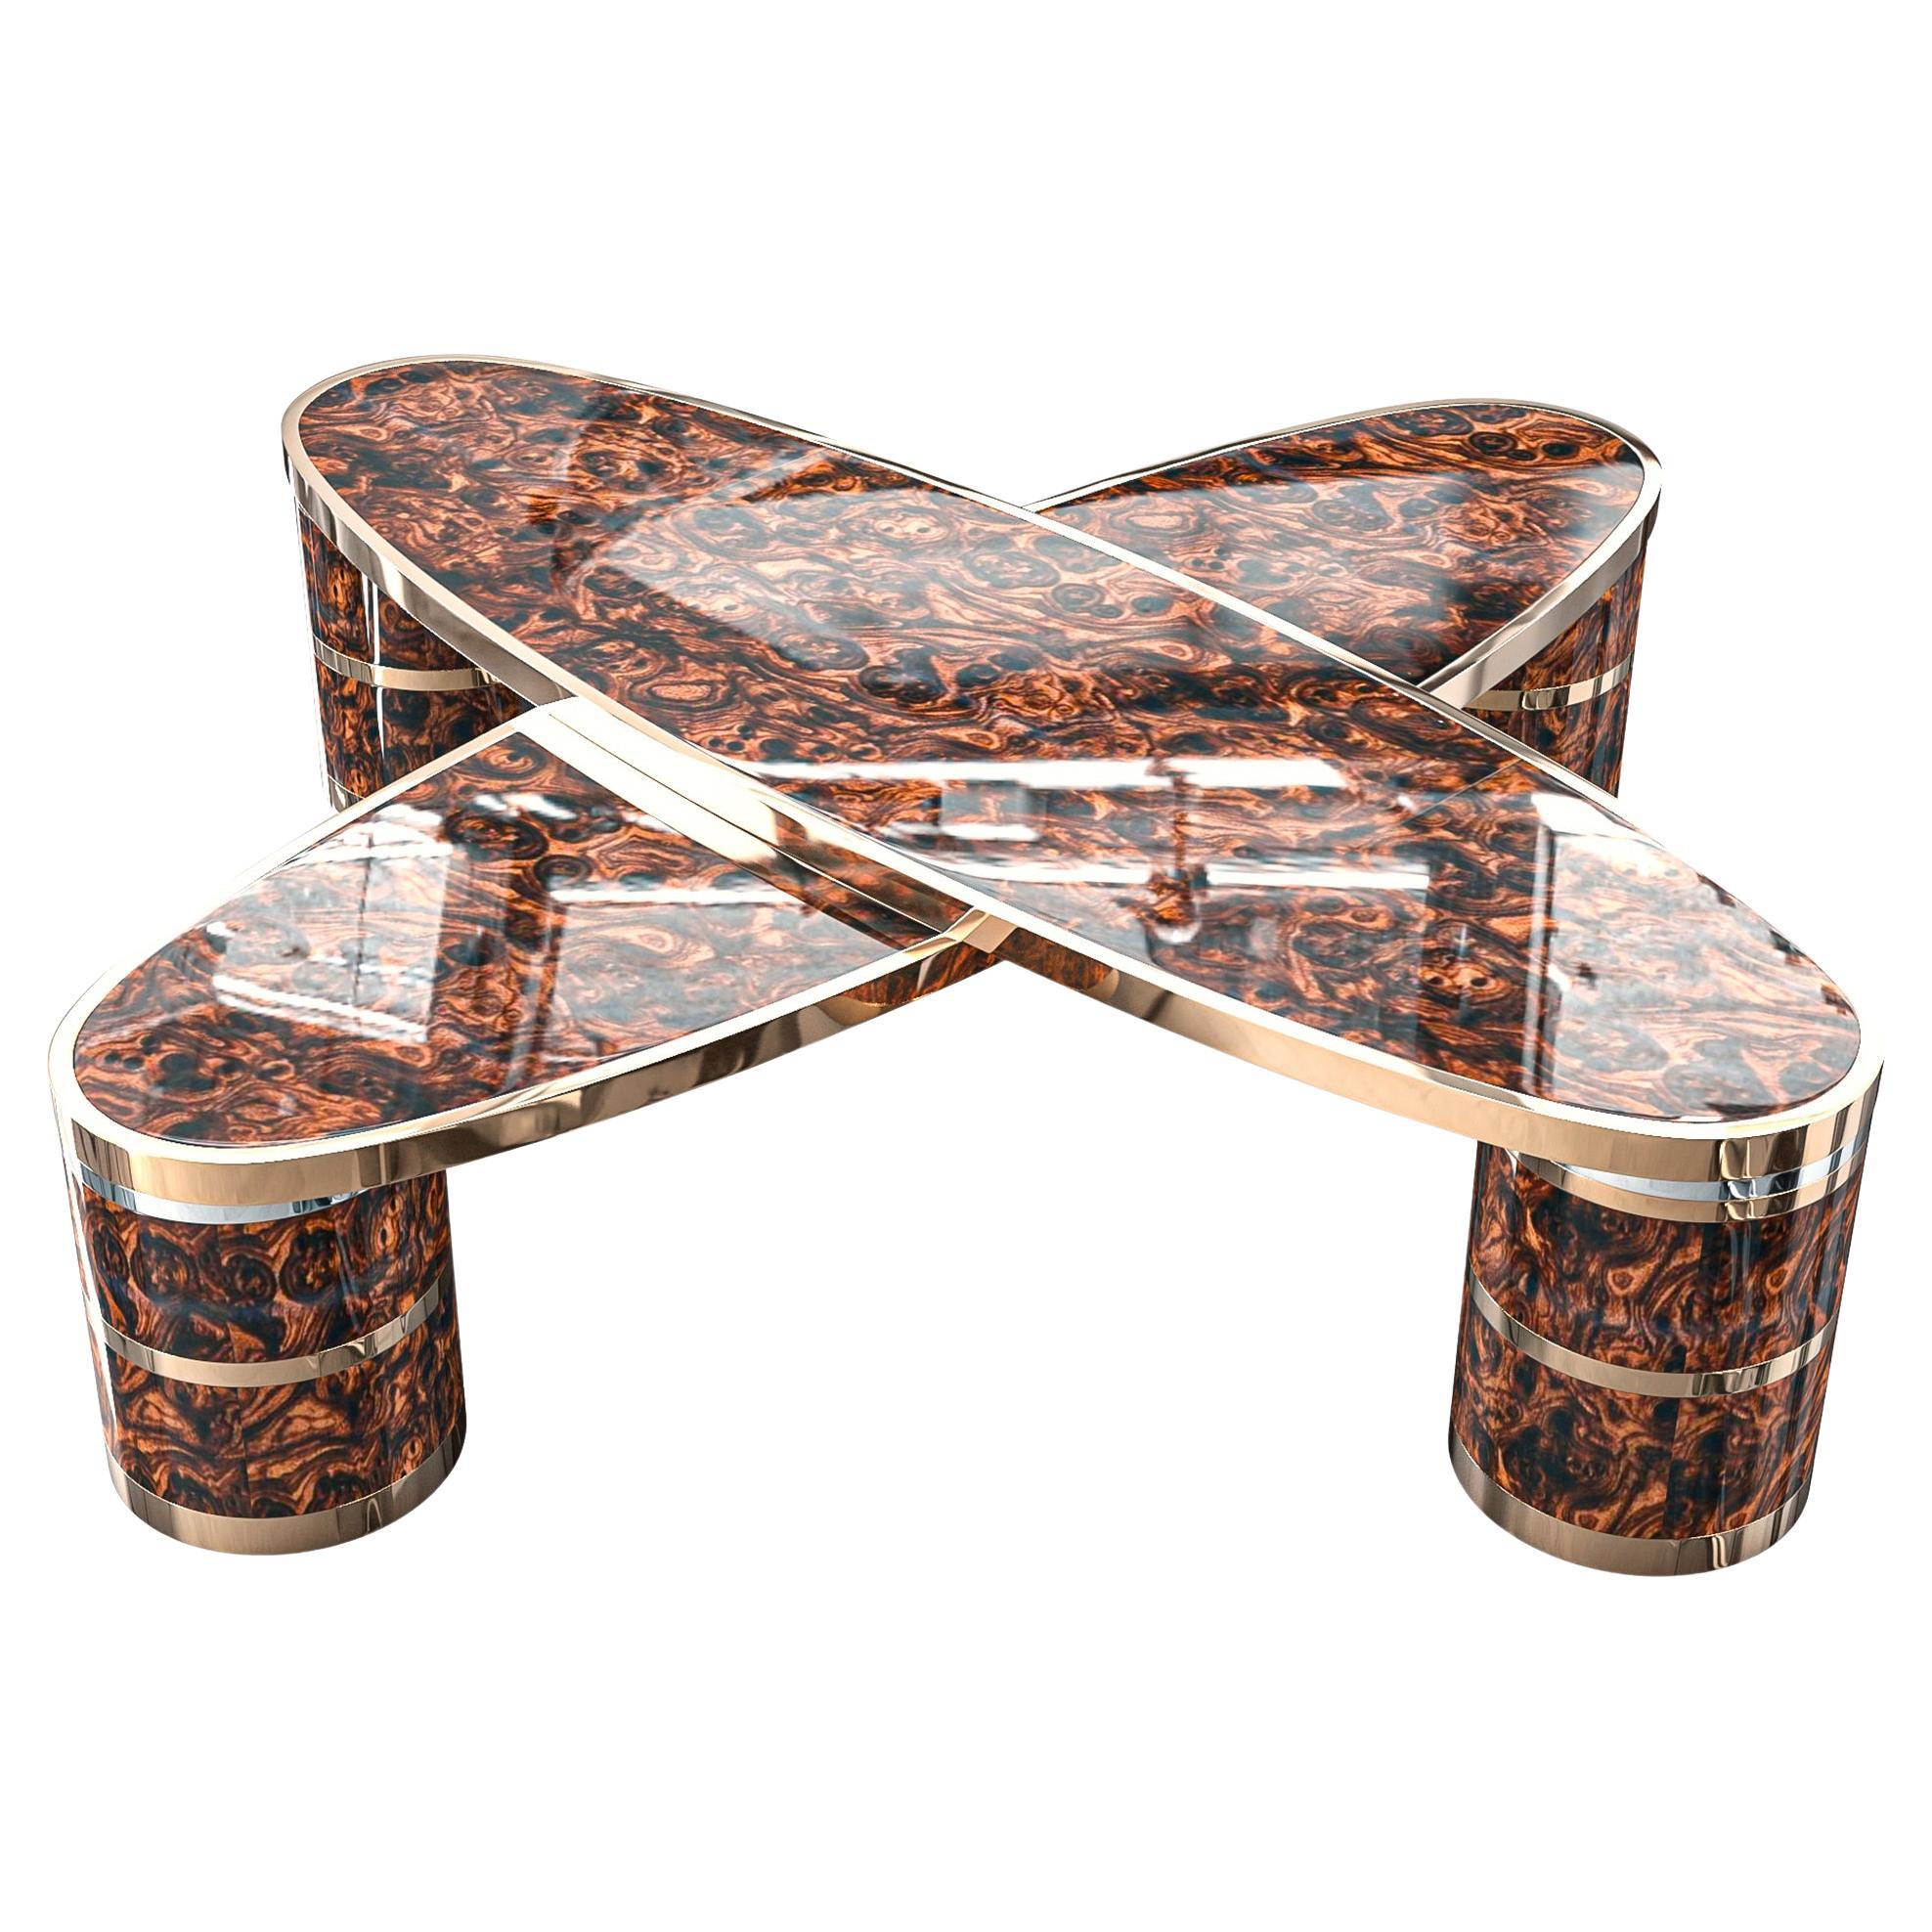 "Melagrana" Coffee Table with Burl Walnut and Bronze Details, Istanbul For Sale